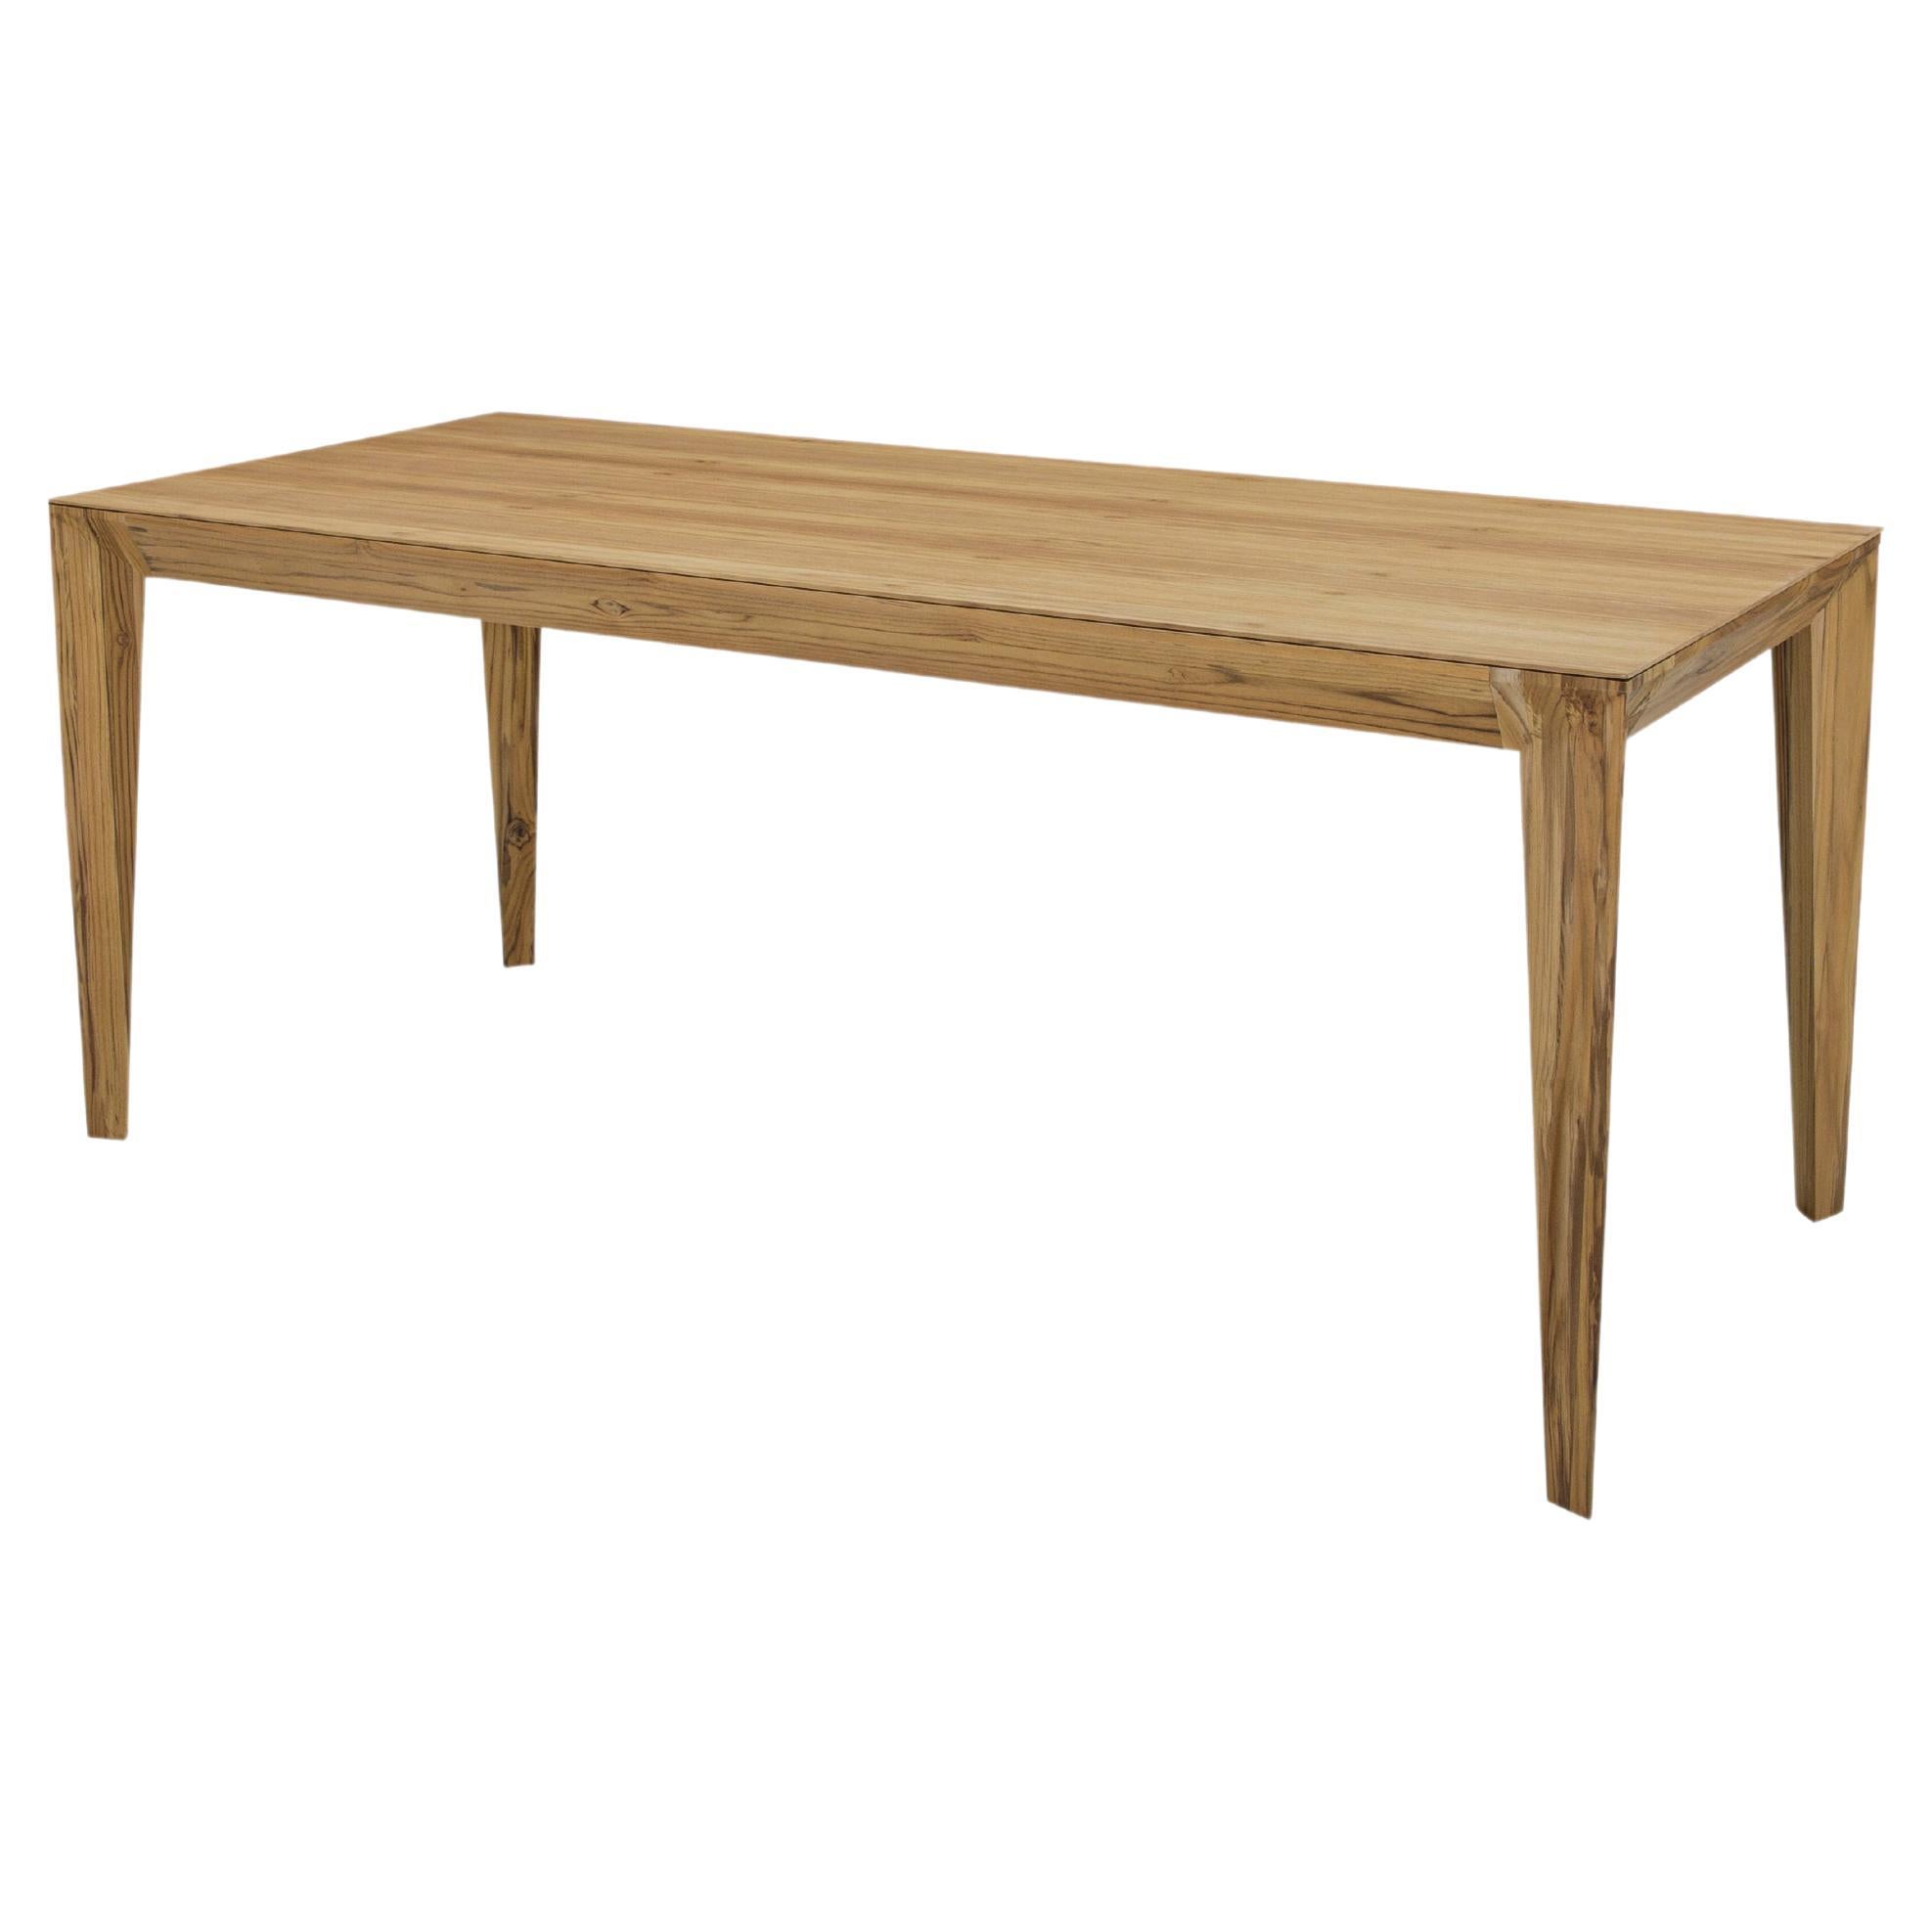 Luce Rectangular Dining Table with a Teak Wood Veneered Table Top 70'' For Sale